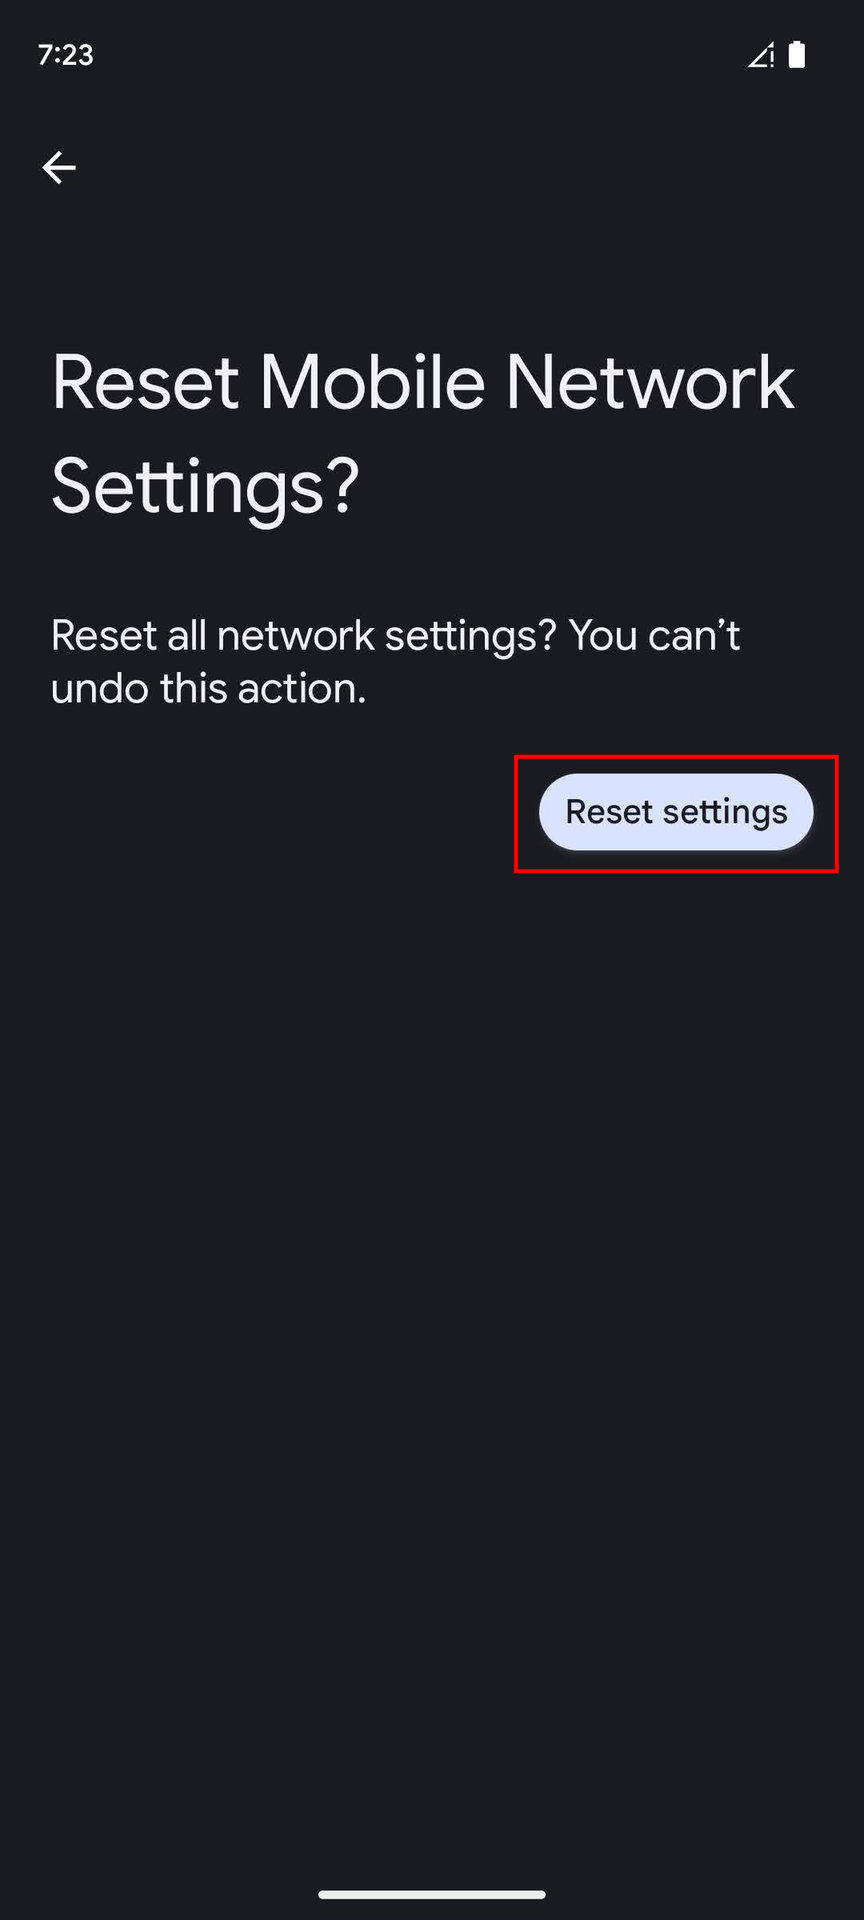 How to reset mobile network settings on Android (5)